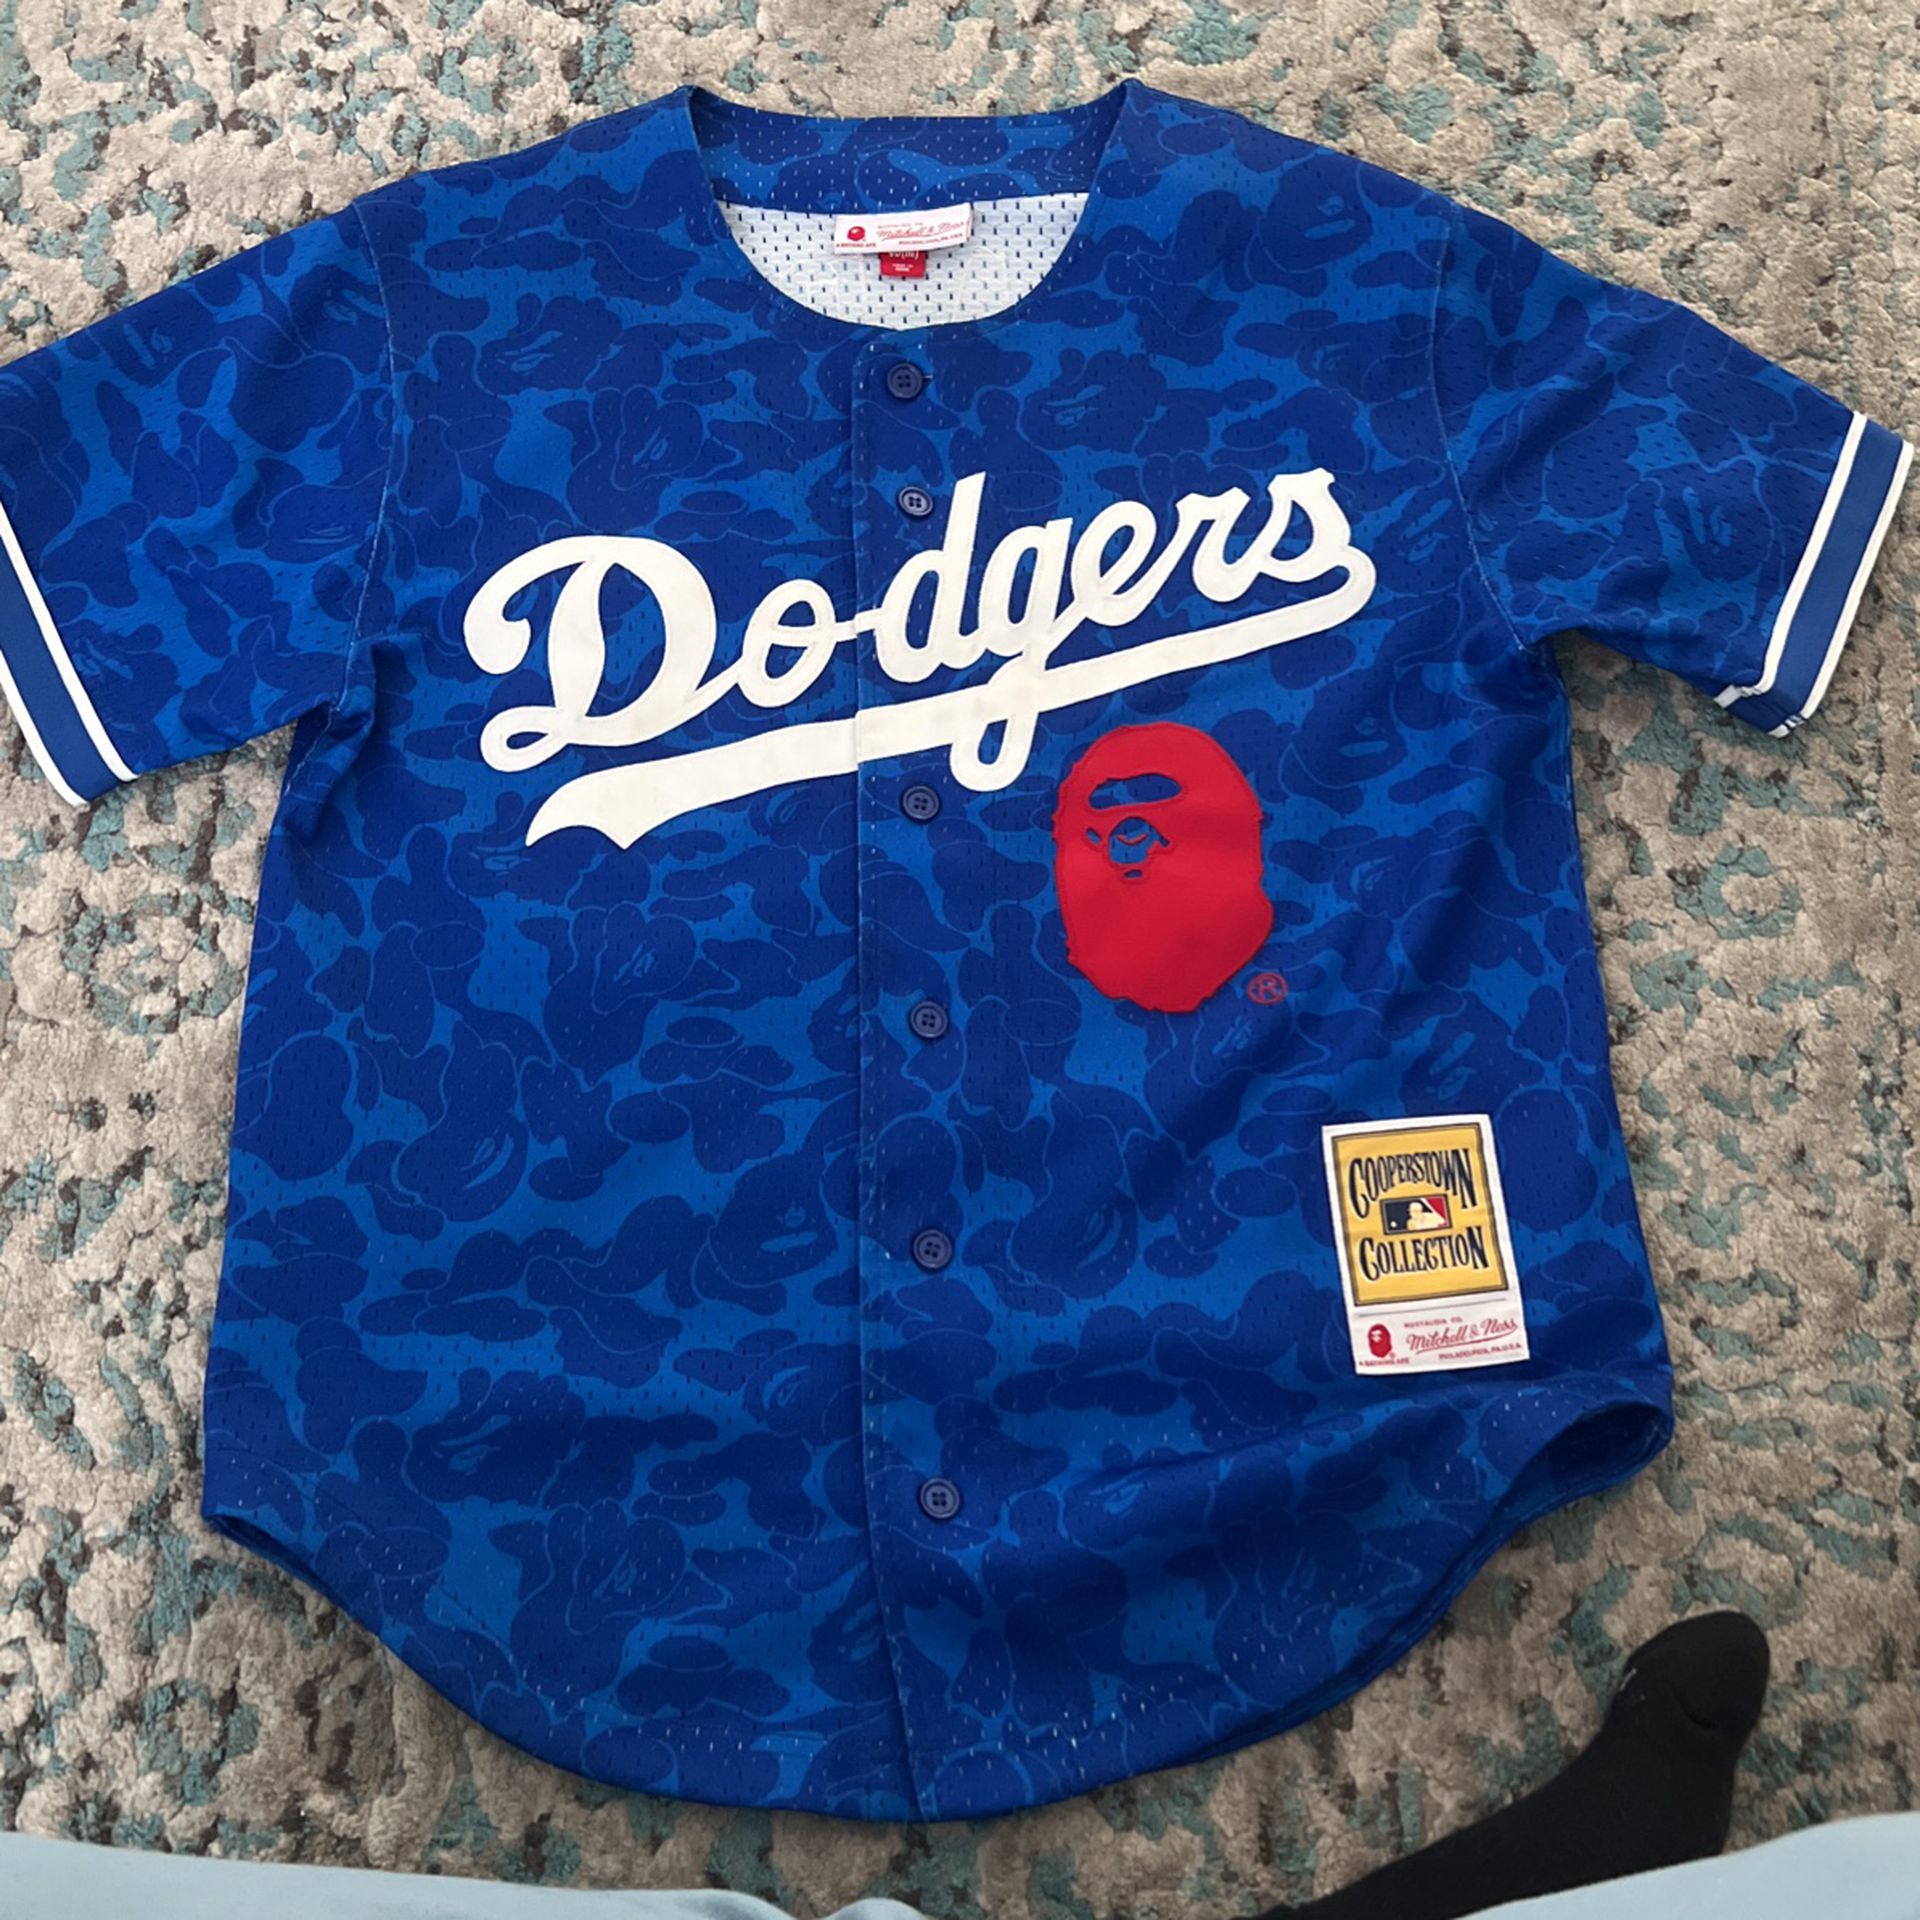 Bape Dodgers Jersey for Sale in Sunny Isles Beach, Florida - OfferUp